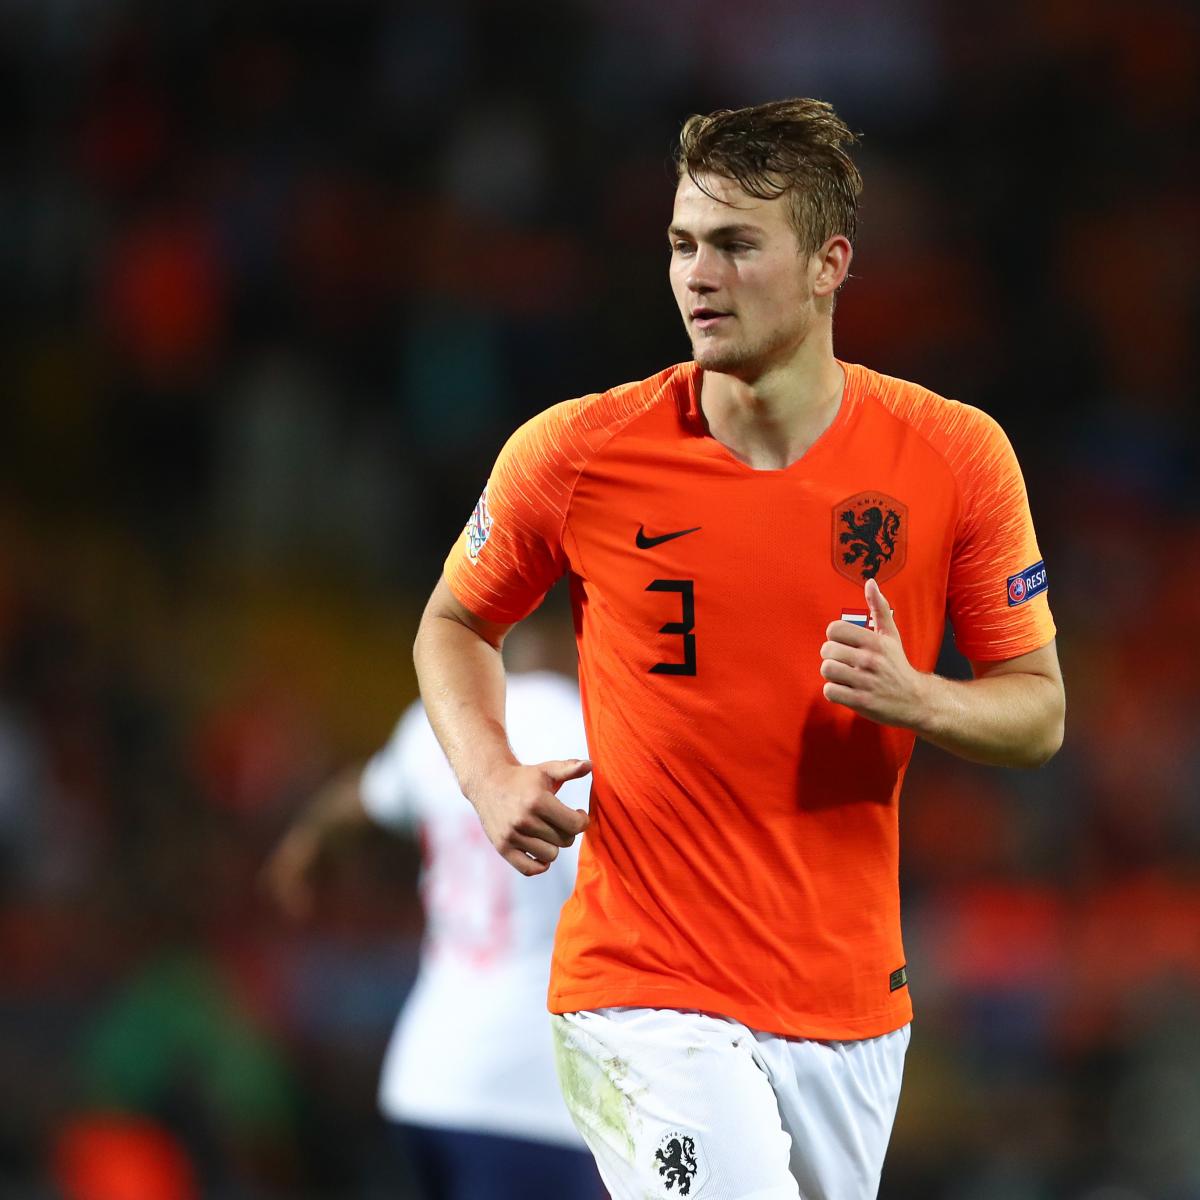 UEFA Nations League 2019 Final: Portugal vs. Netherlands Schedule and Preview ...